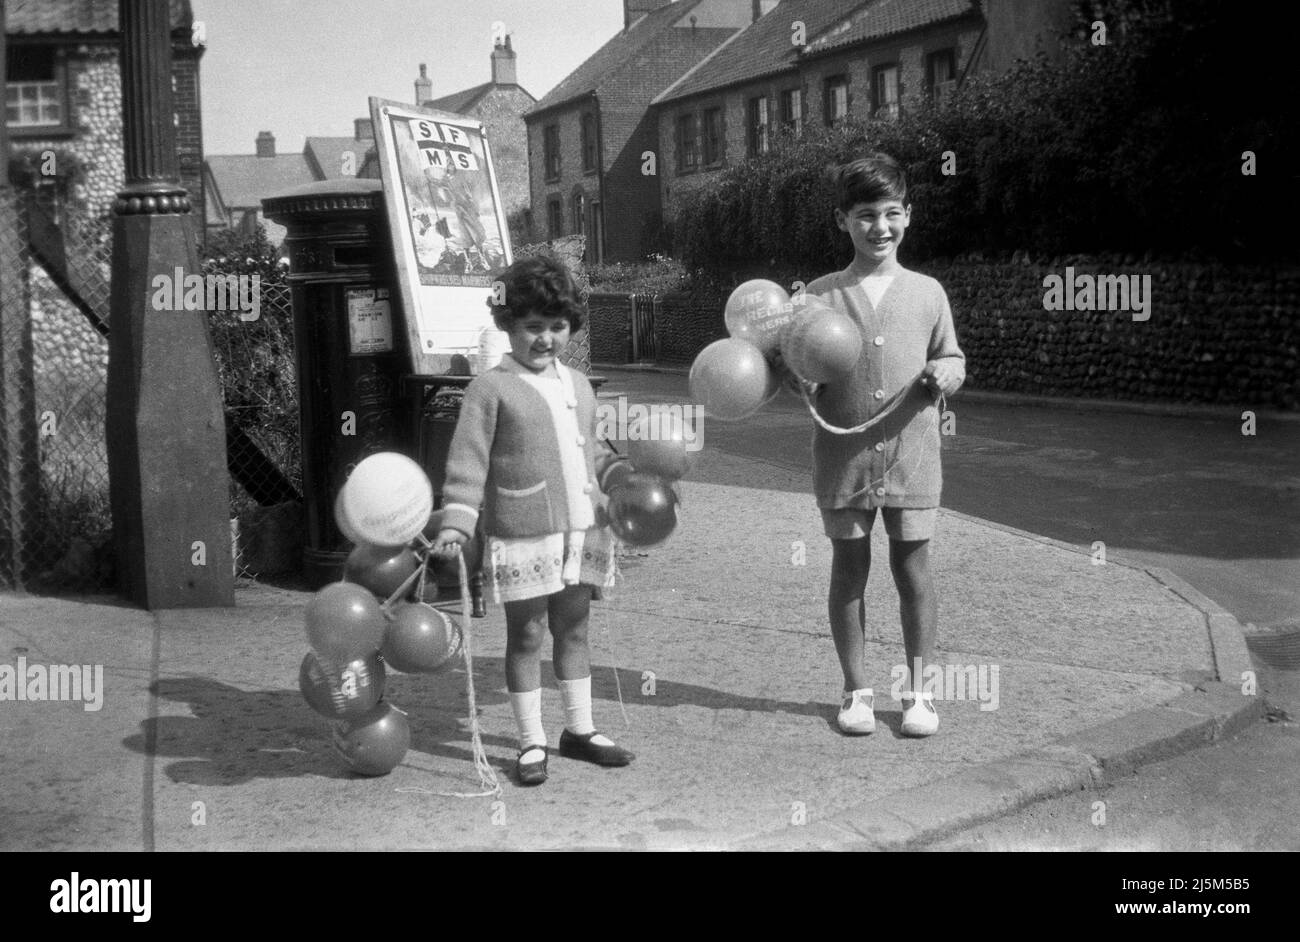 circa 1938, historical, two young children standing on the corner of a village square selling balloons to raise funds for the Shipwrecked Mariners Society, England, UK. Founded as long ago as 1839, and still operating today, the charity provides support to the retired merchant seafarers and fisherman and of course those affected by shipwrecks. Beside the letterbox, a poster for the  'flag & baloon' day for 'The Shipwrecked Mariners' Society', note the different spelling of balloon. Stock Photo